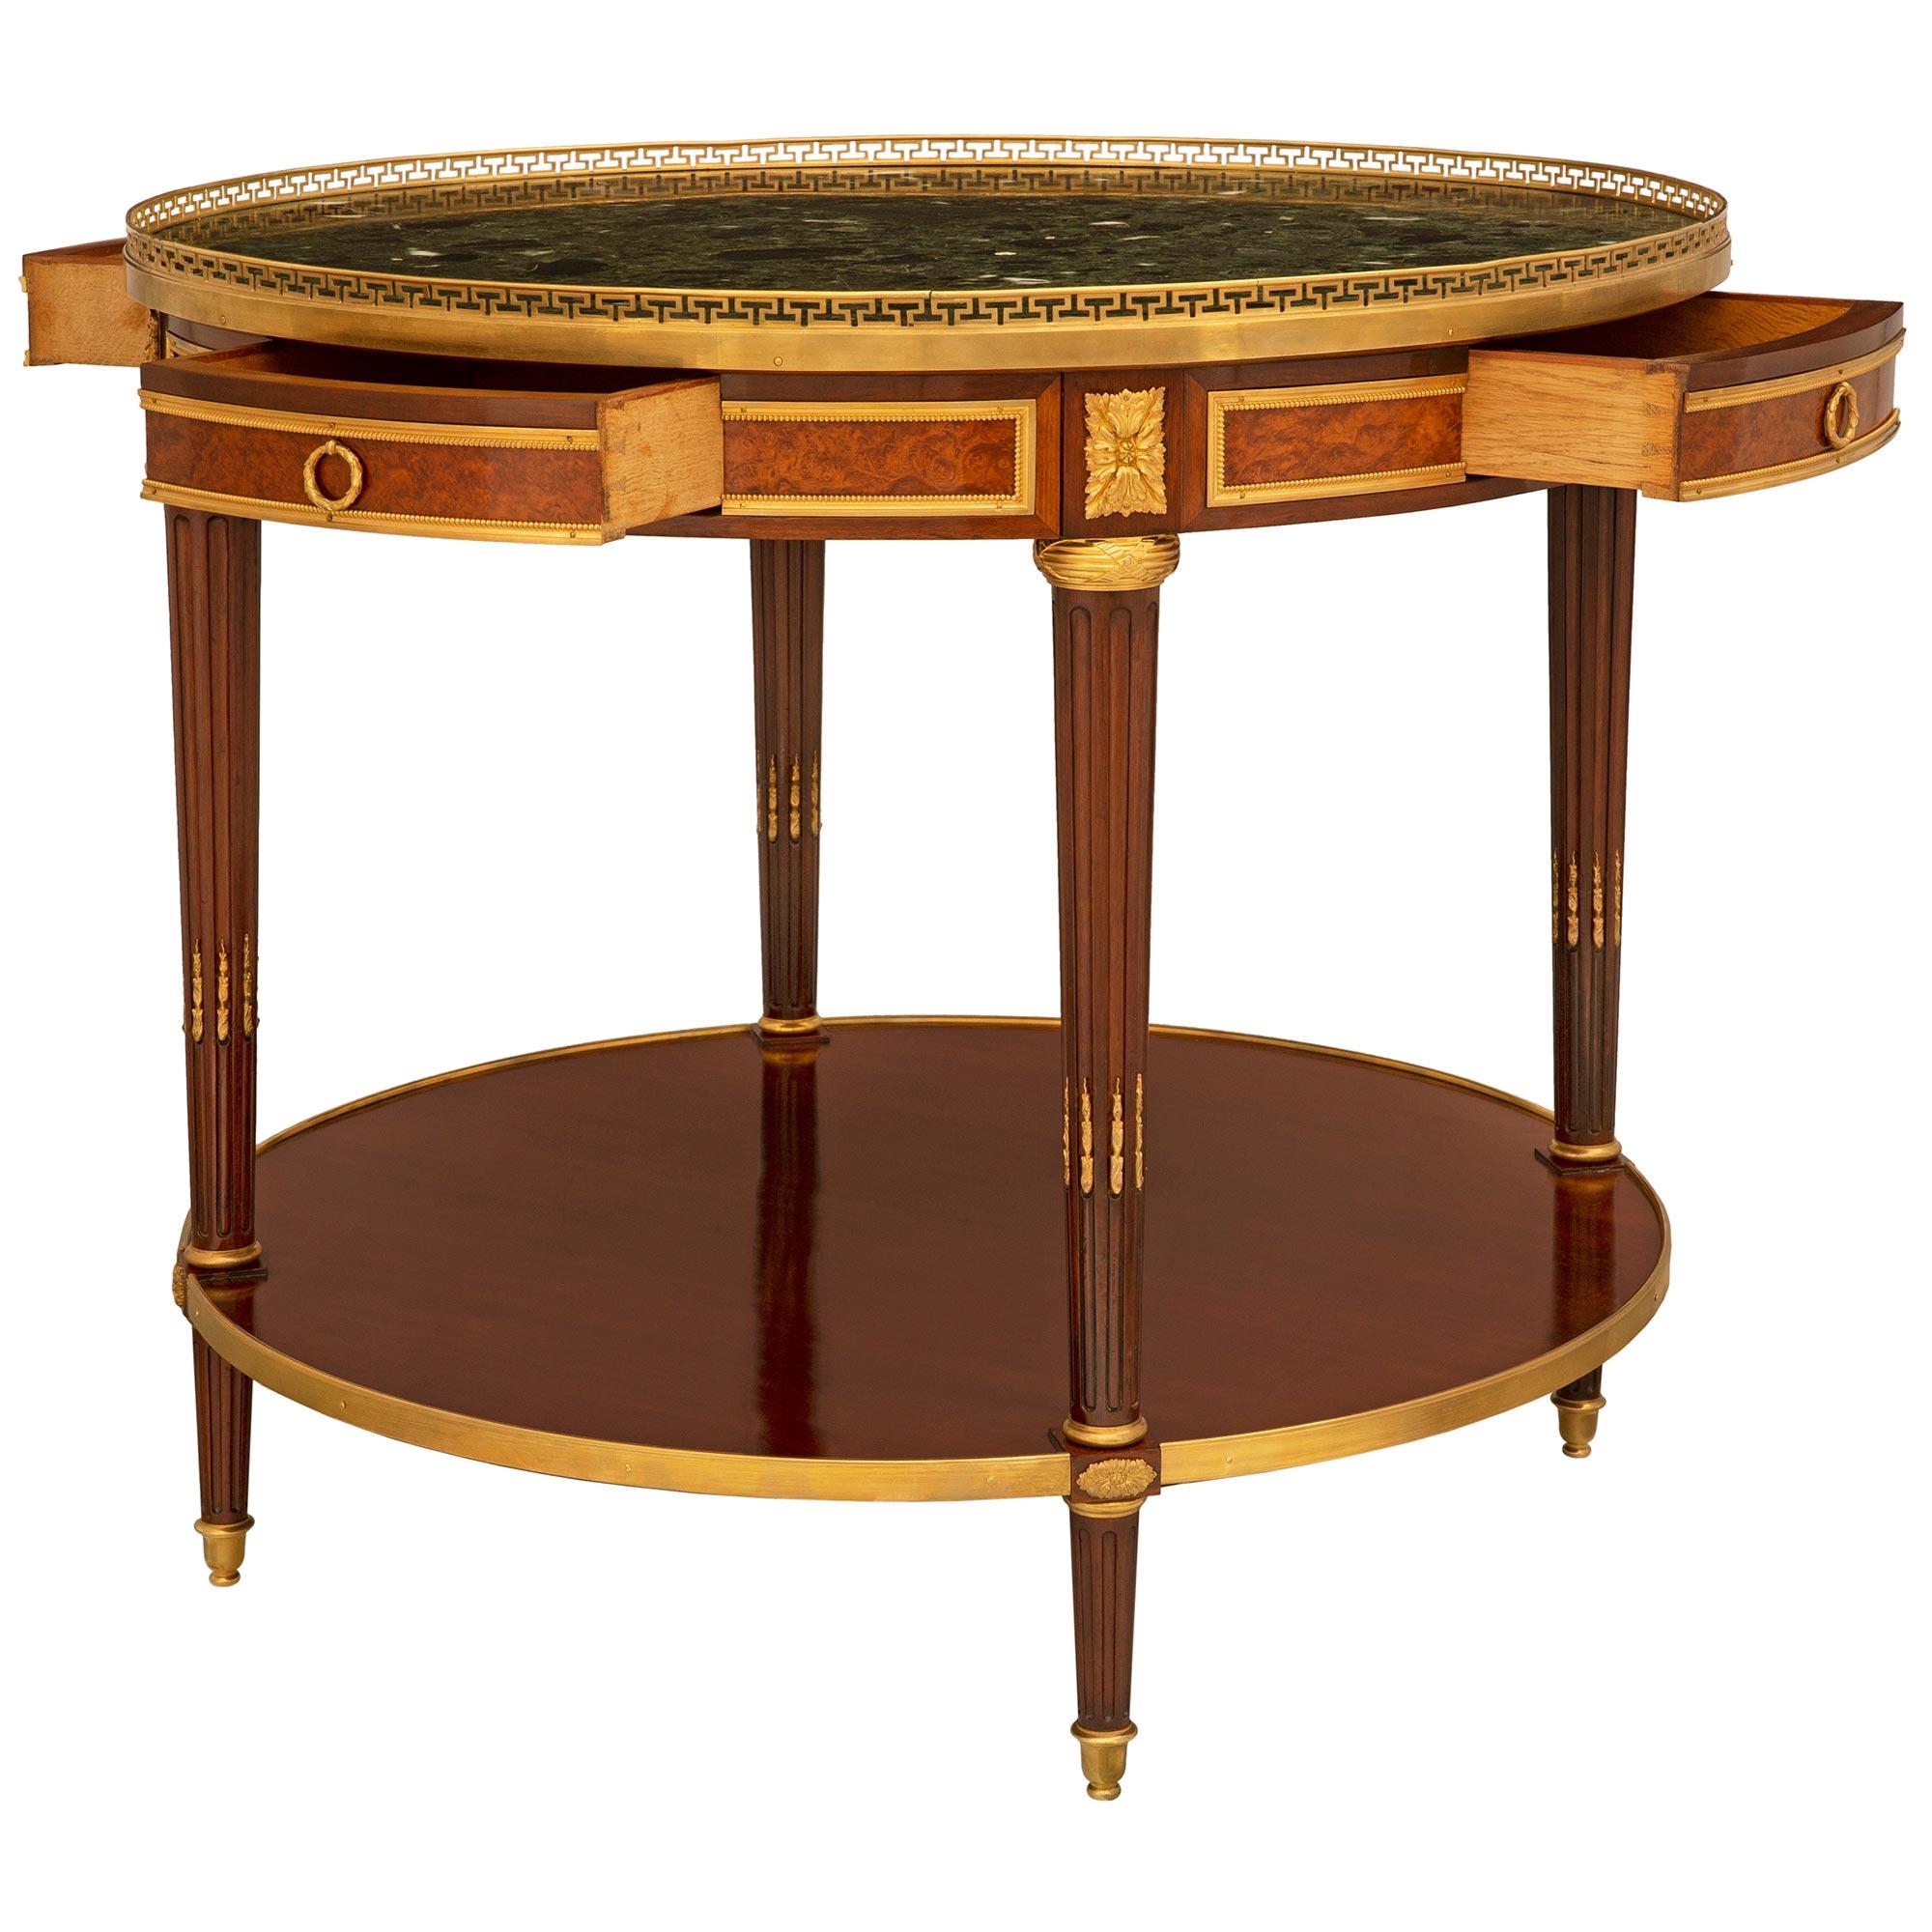 Ormolu French 19th Century Louis XVI Style Bouillon Table, Signed Tahan